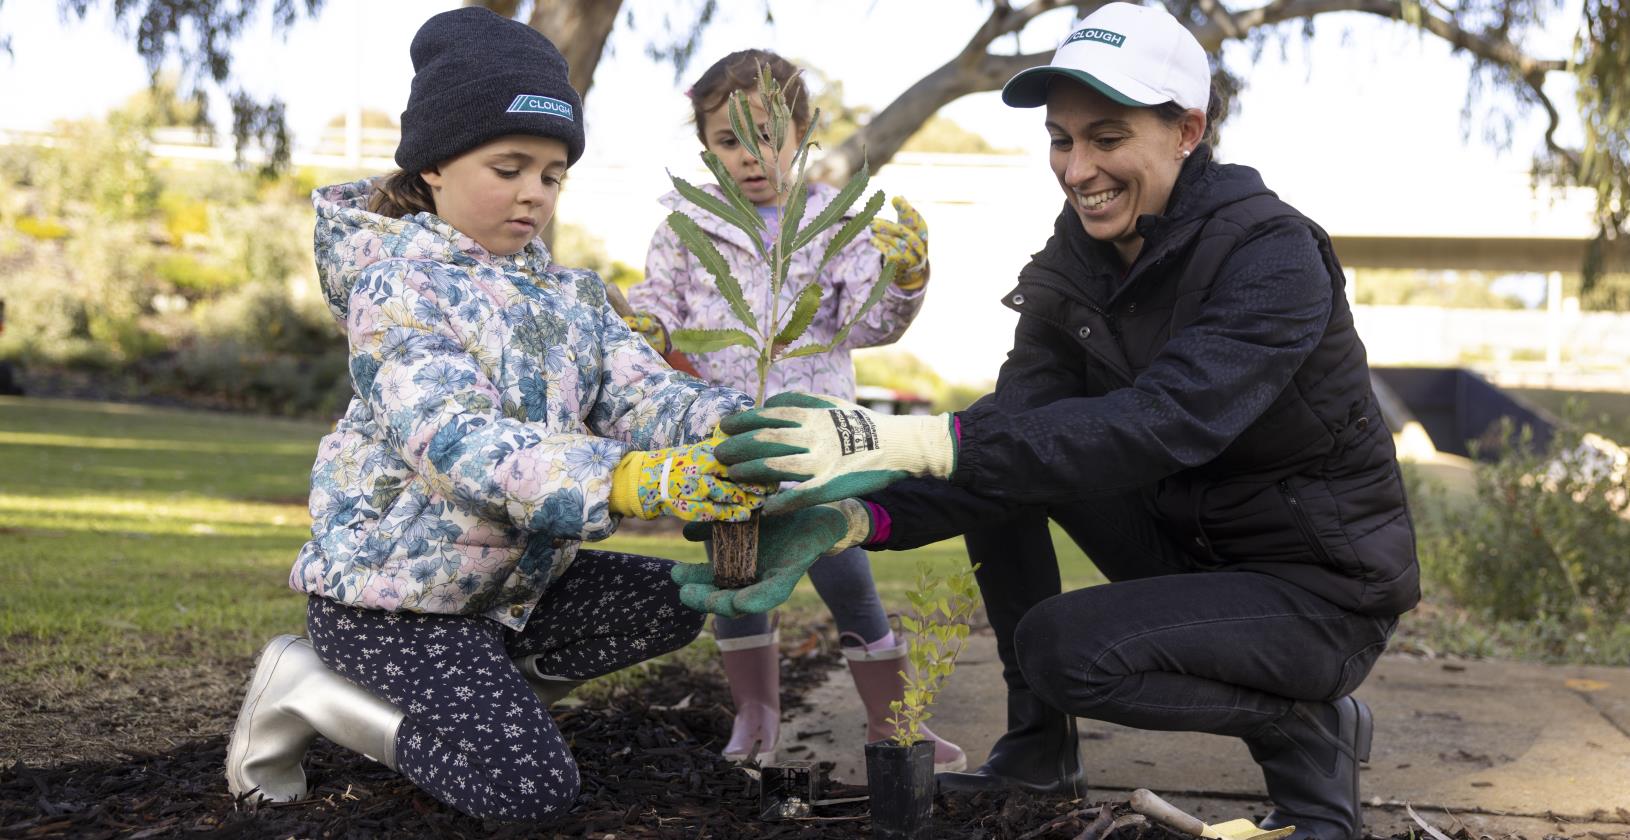 Tree Month is back in the city this May